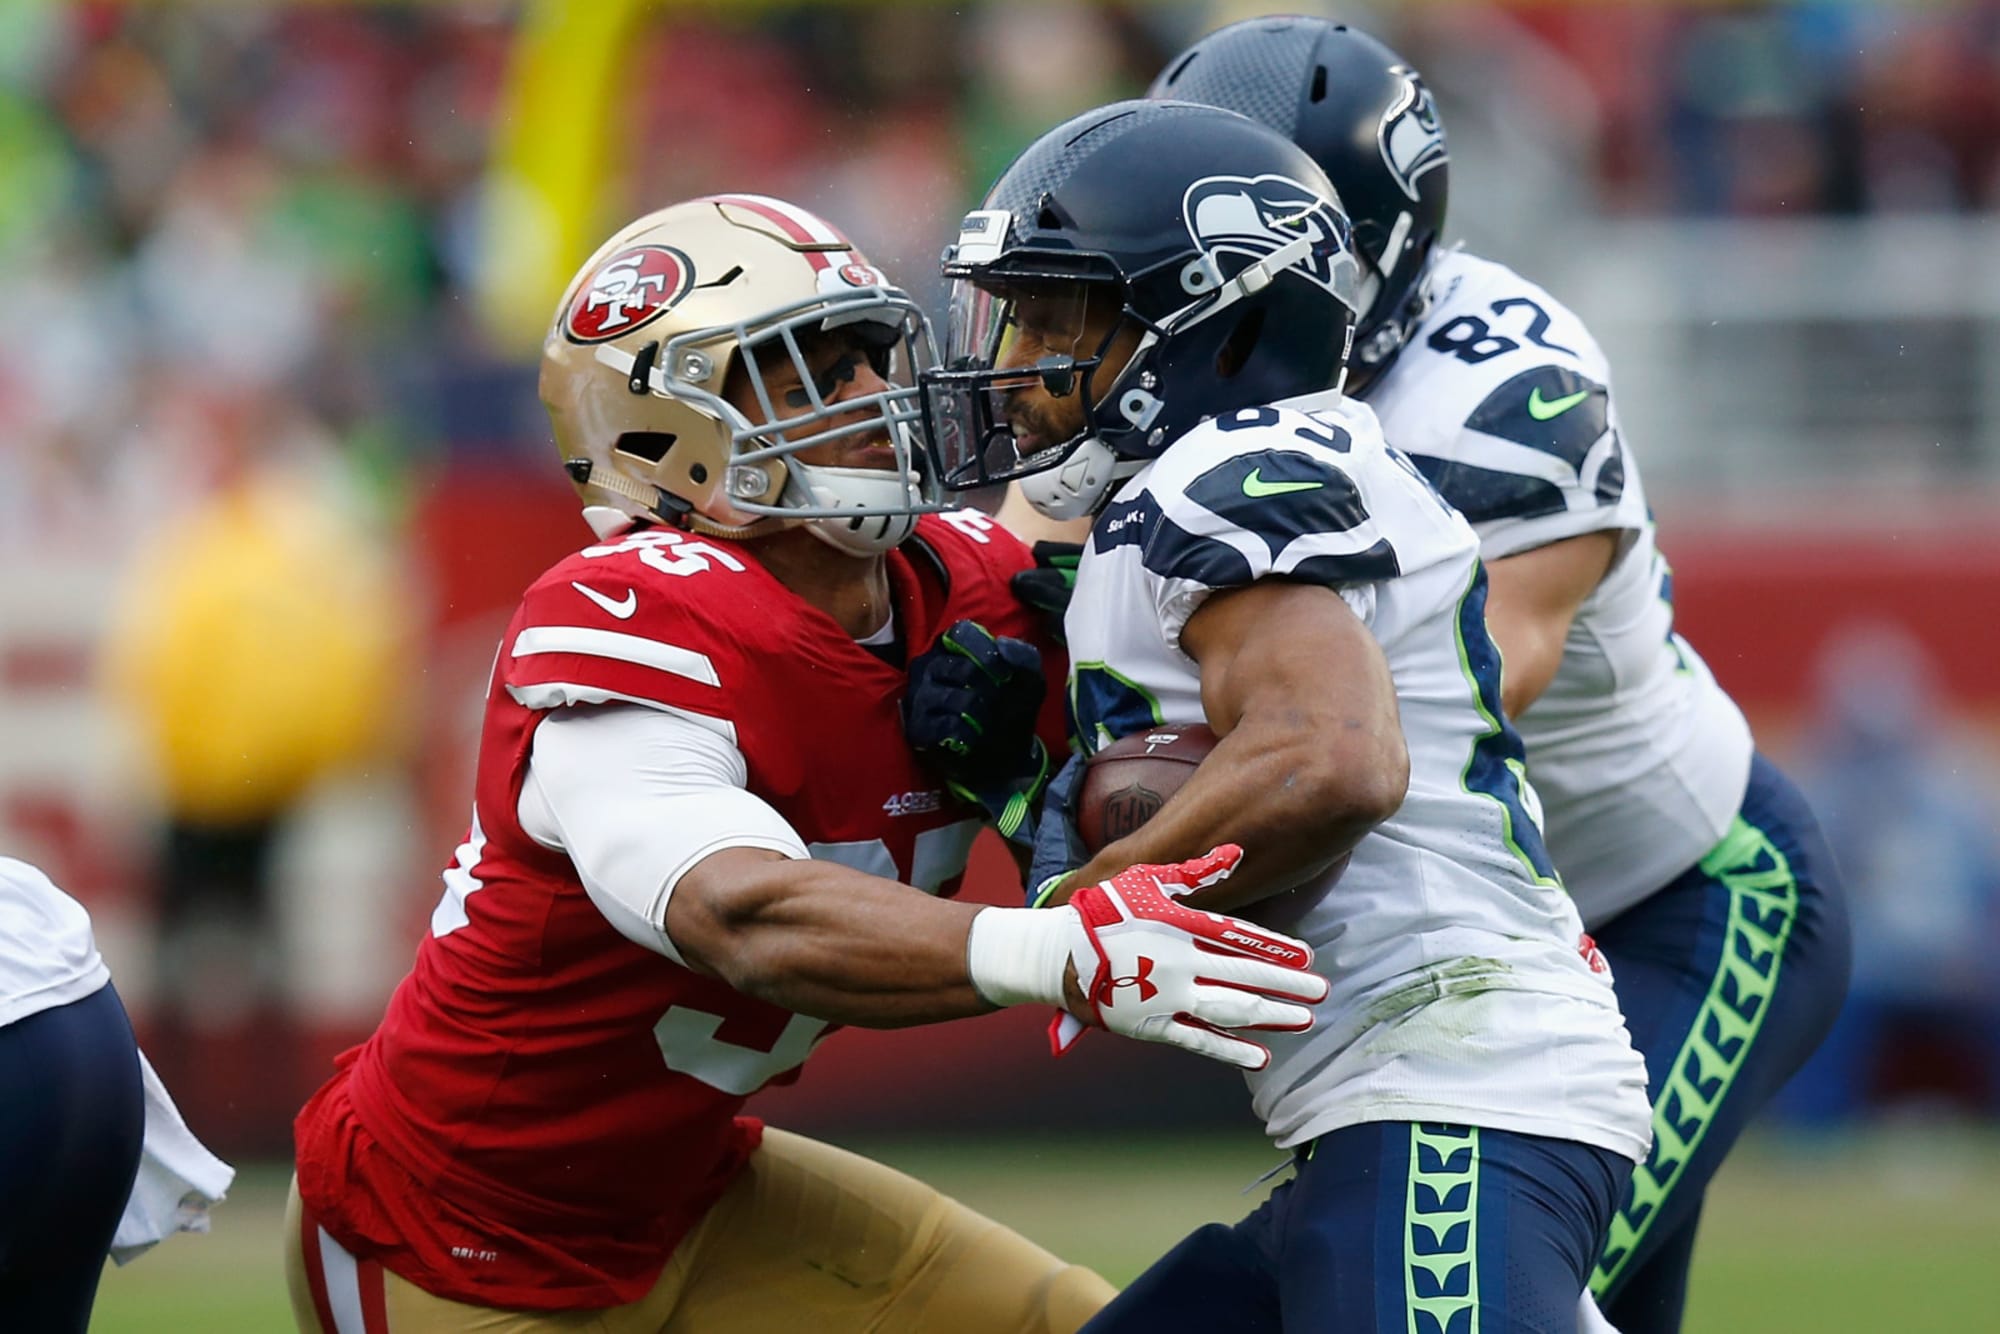 49ers vs. Seahawks Week 10 Monday Night Football preview